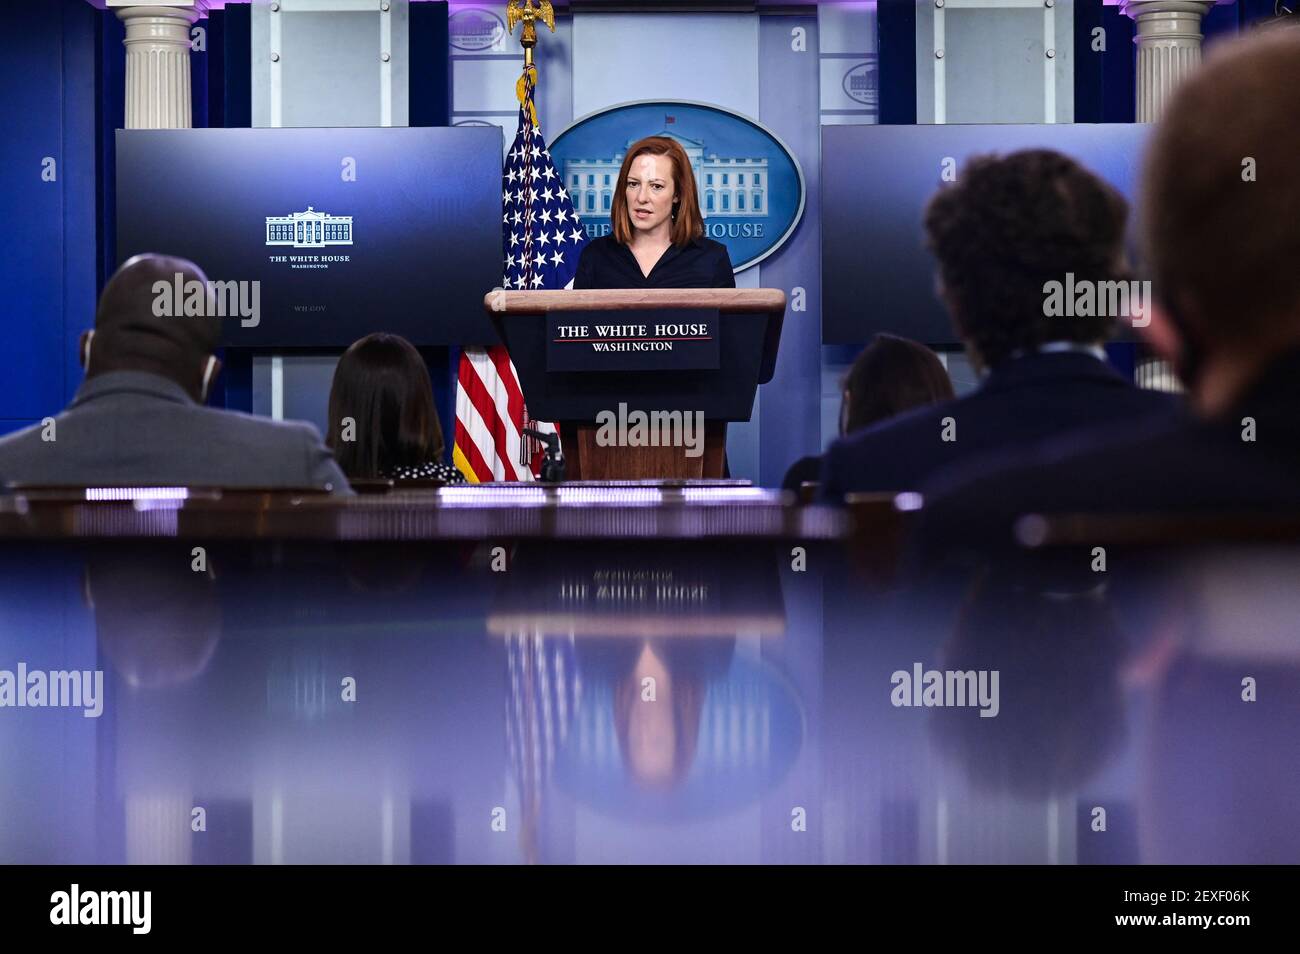 Jen Psaki, White House press secretary, speaks during a news conference in the James S. Brady Press Briefing Room at the White House in Washington, D.C., U.S., on Thursday, March 4, 2021. President Biden is struggling to head off a potential humanitarian and political crisis on the U.S. southern border, where a spike in migrant crossings, particularly by unaccompanied children, threatens to overwhelm government shelters. Credit: Erin Scott / Pool via CNP Stock Photo